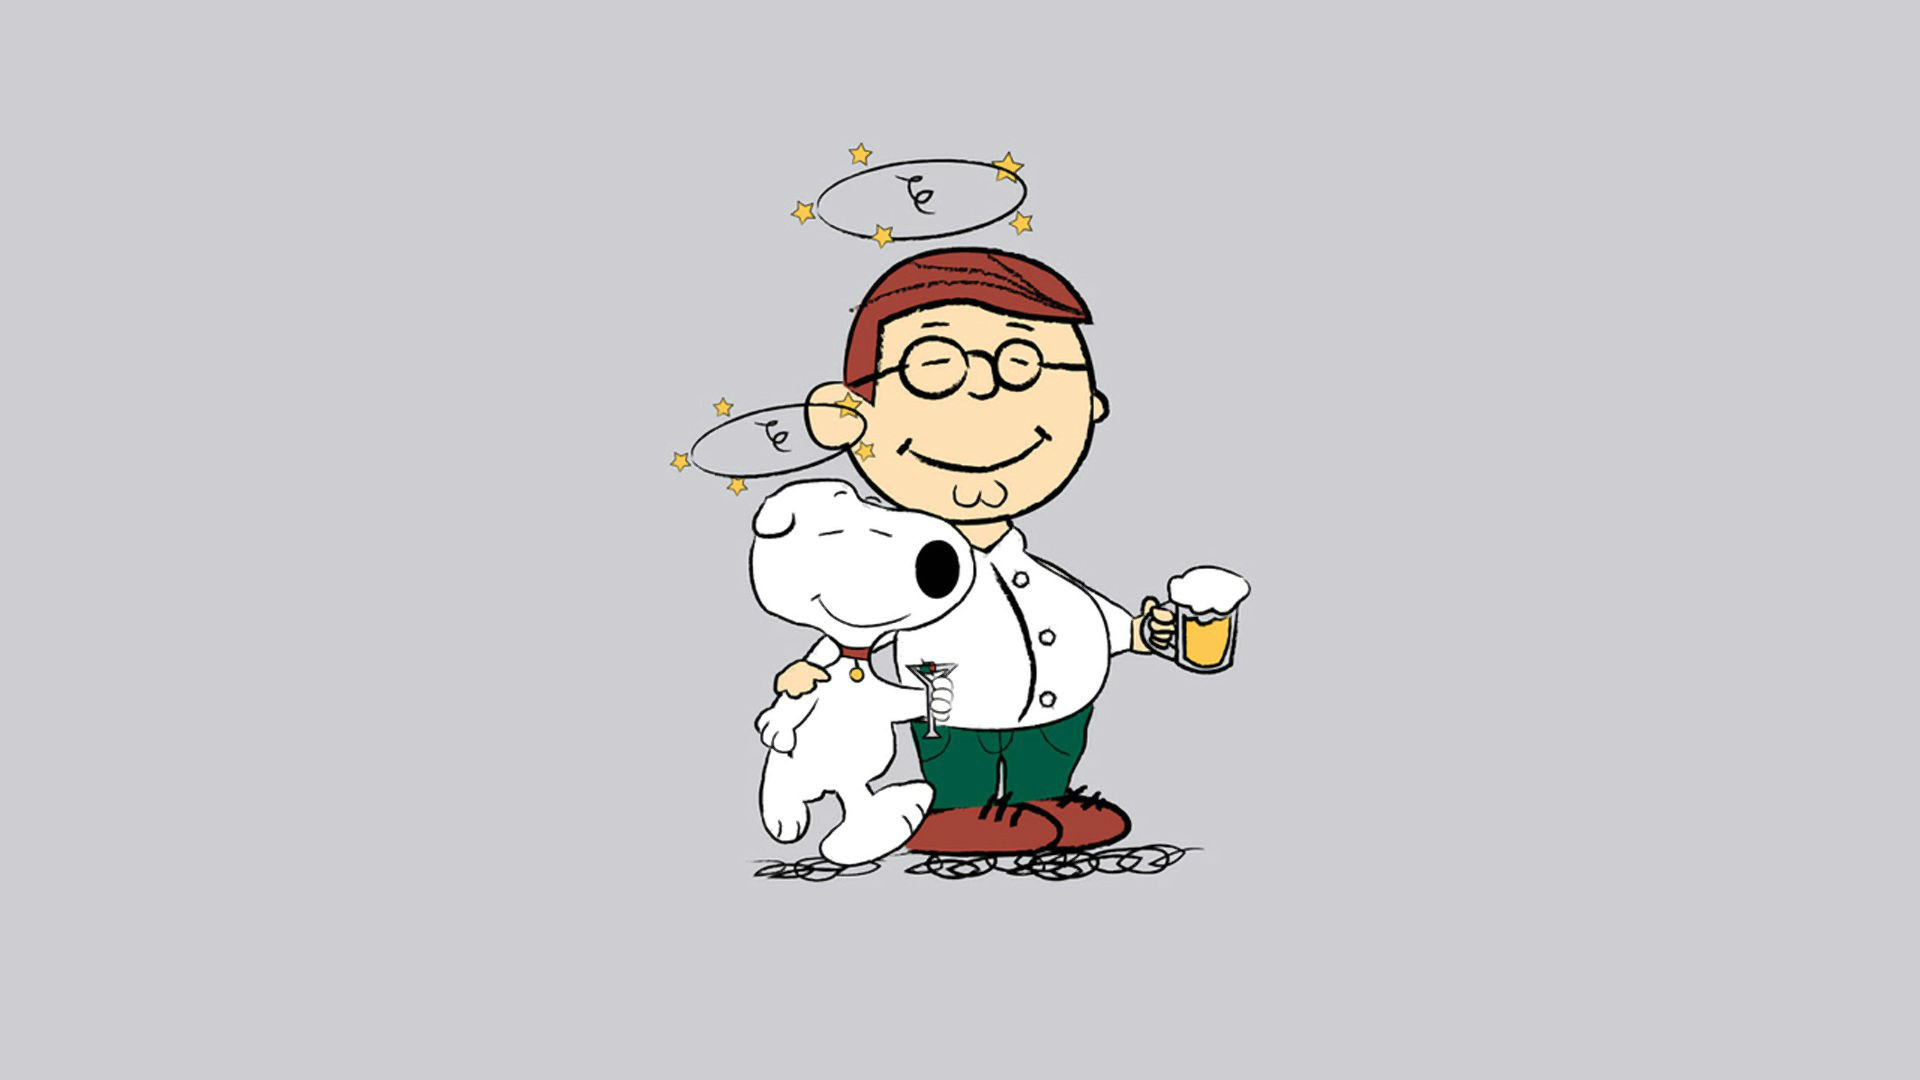 Family Guy Wallpaper  iXpap  Family guy stewie icon Family guy cartoon Family  guy stewie